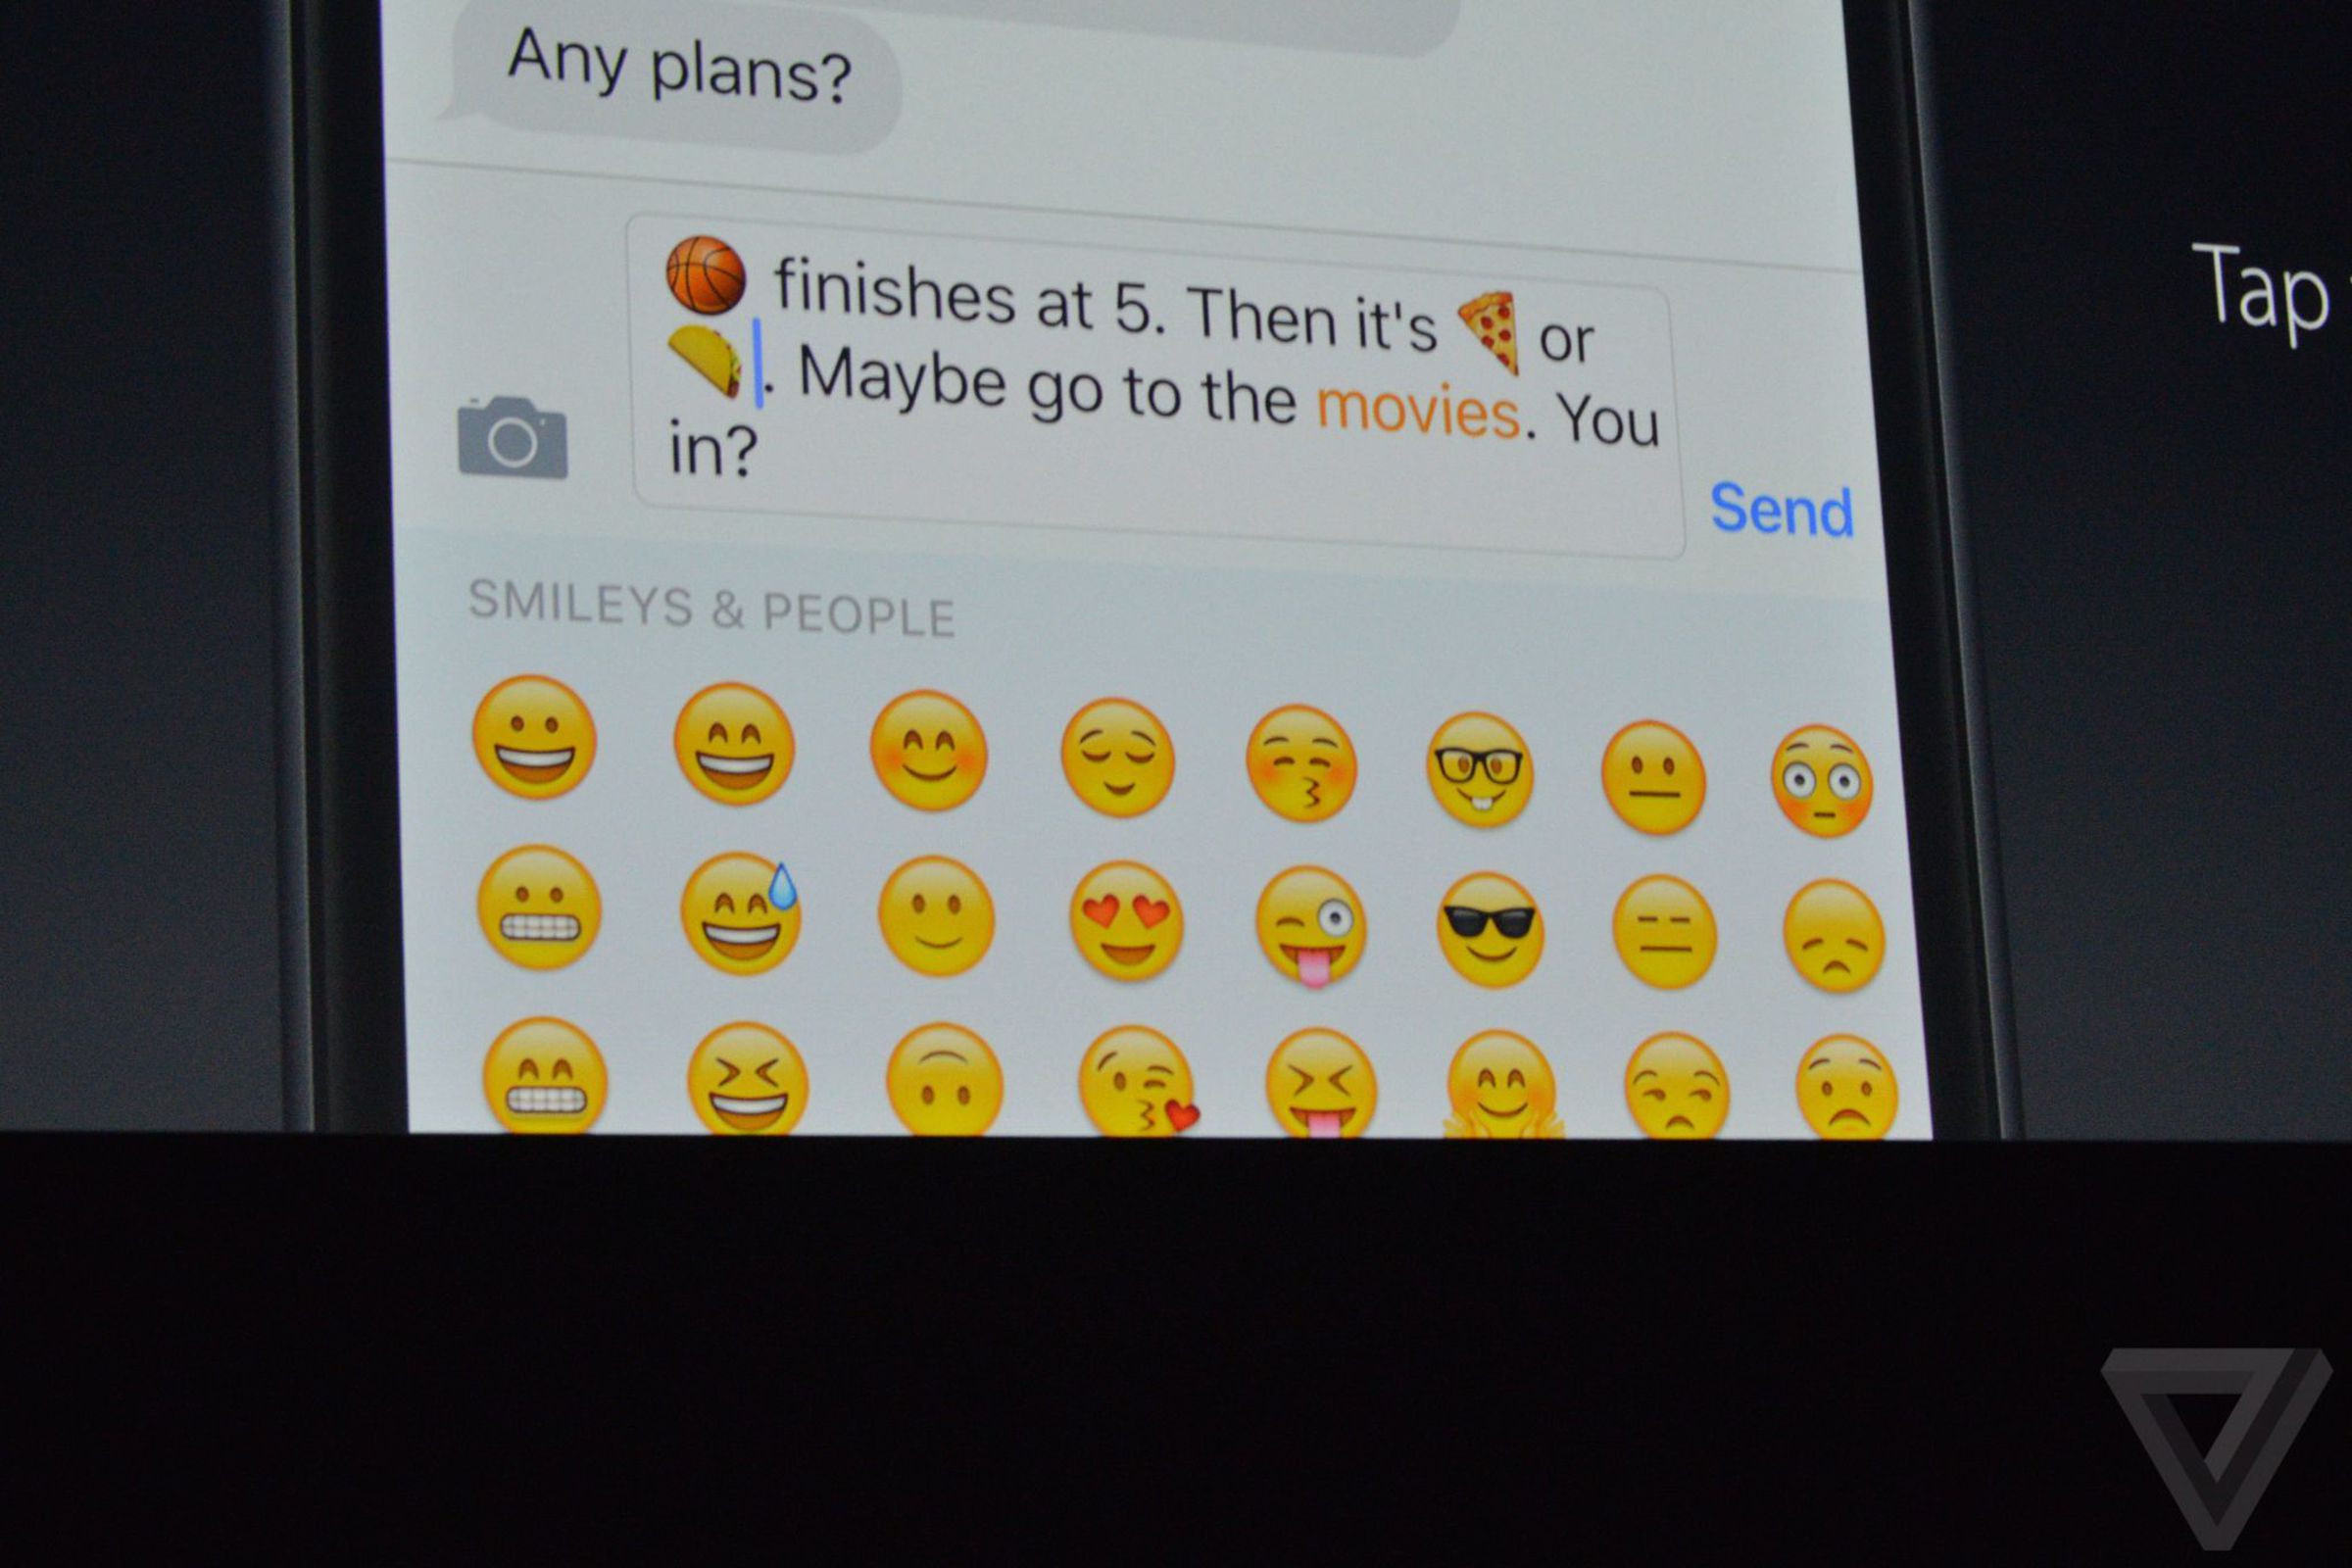 iMessage at WWDC16 announcement photos